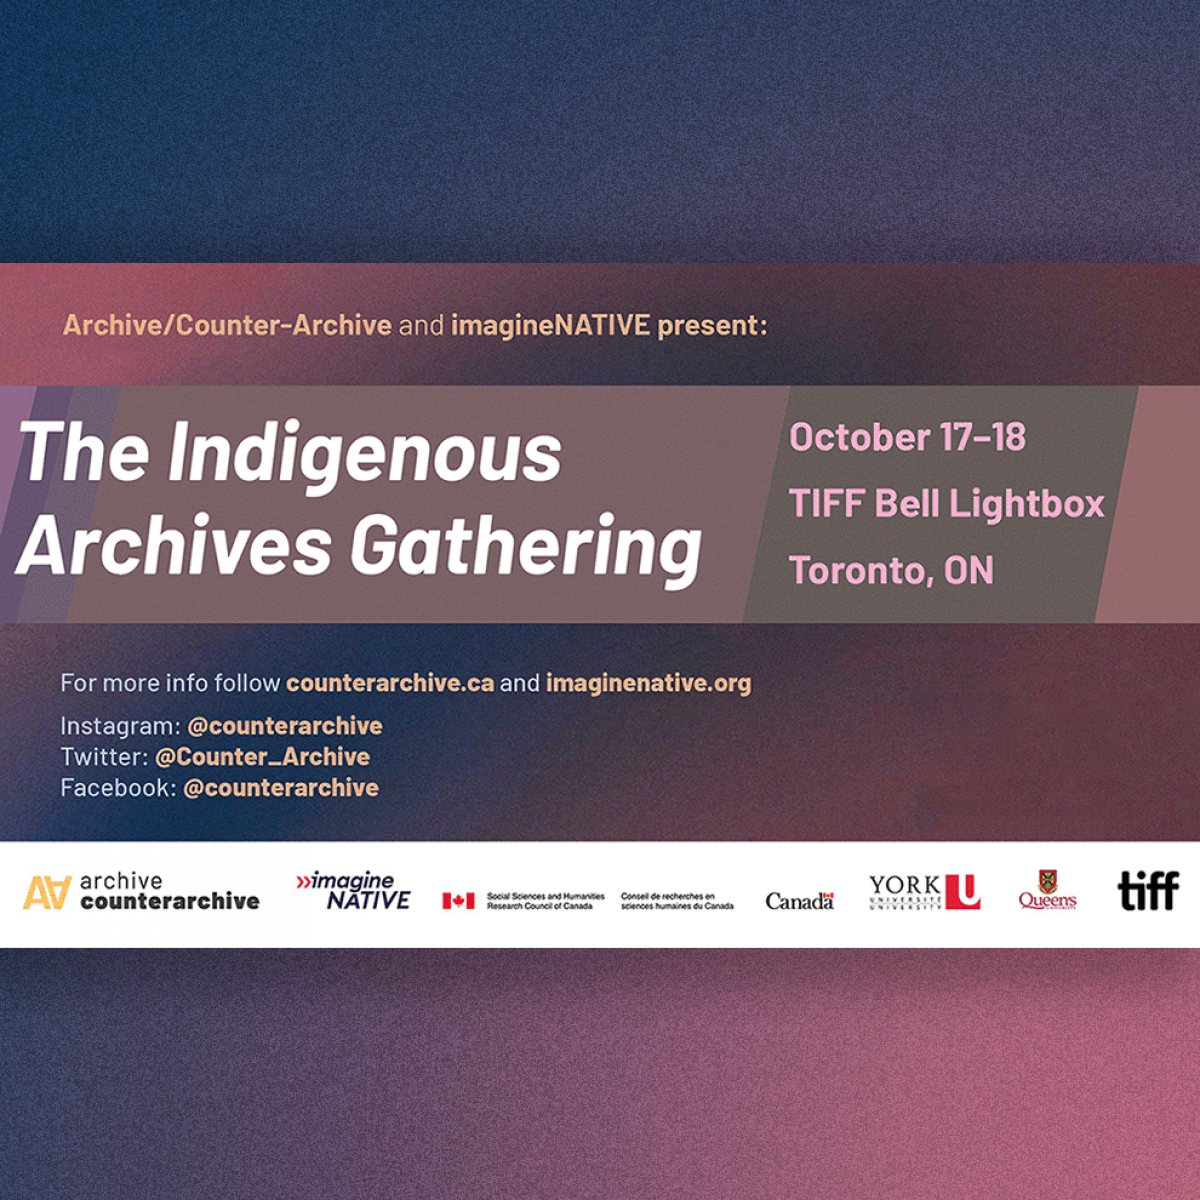 A promotional image with the text "The Indigenous Archives Gathering" placed over a purple gradient background. There are also many small logos and social media account handles scattered around the image as well.